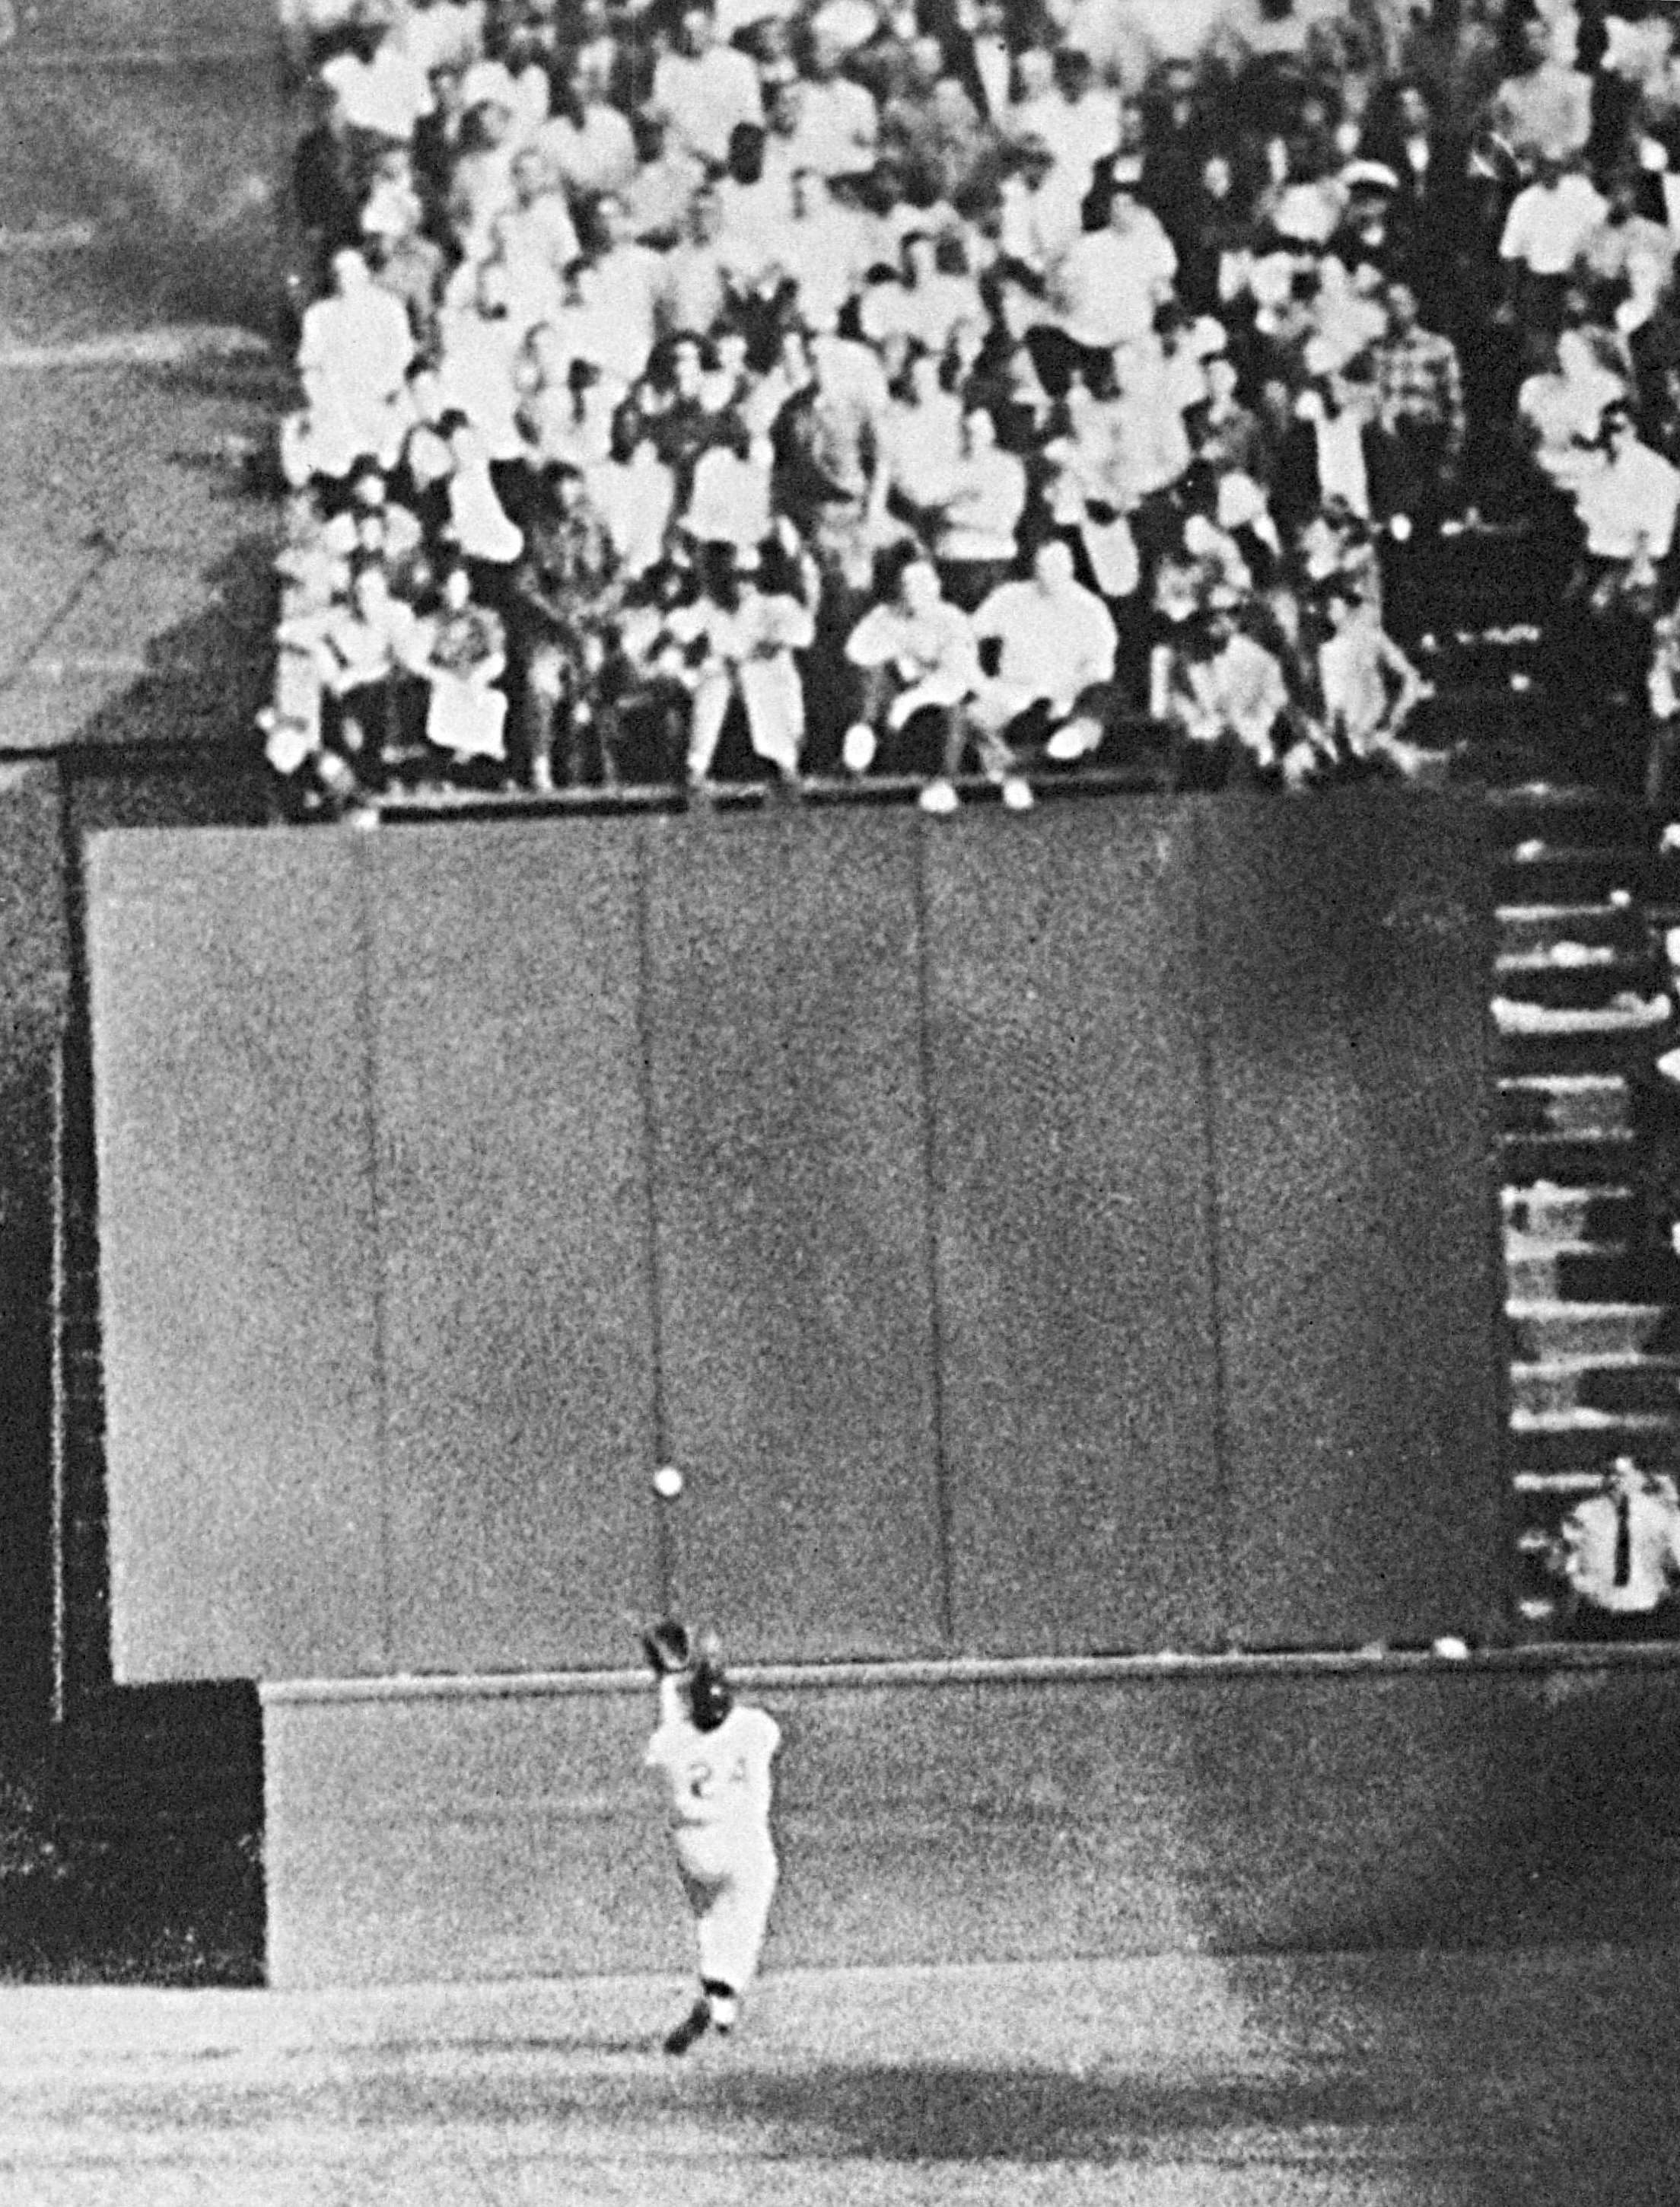  In this Sept. 29, 1954, file photo, New York Giants center fielder Willie Mays, running at top speed with his back to the plate, gets under a 450-foot blast off the bat of Cleveland Indians first baseman Vic Wertz to pull the ball down in front of the bleachers wall in the eighth inning of Game 1 of the World Series at the Polo Grounds in New York. After setting a then-American League record with 111 victories, Cleveland was swept by the Giants in a World Series best known for Mays' amazing over-the-shoulder catch, a highlight that still taunts the Indians to this day. (AP Photo, File)